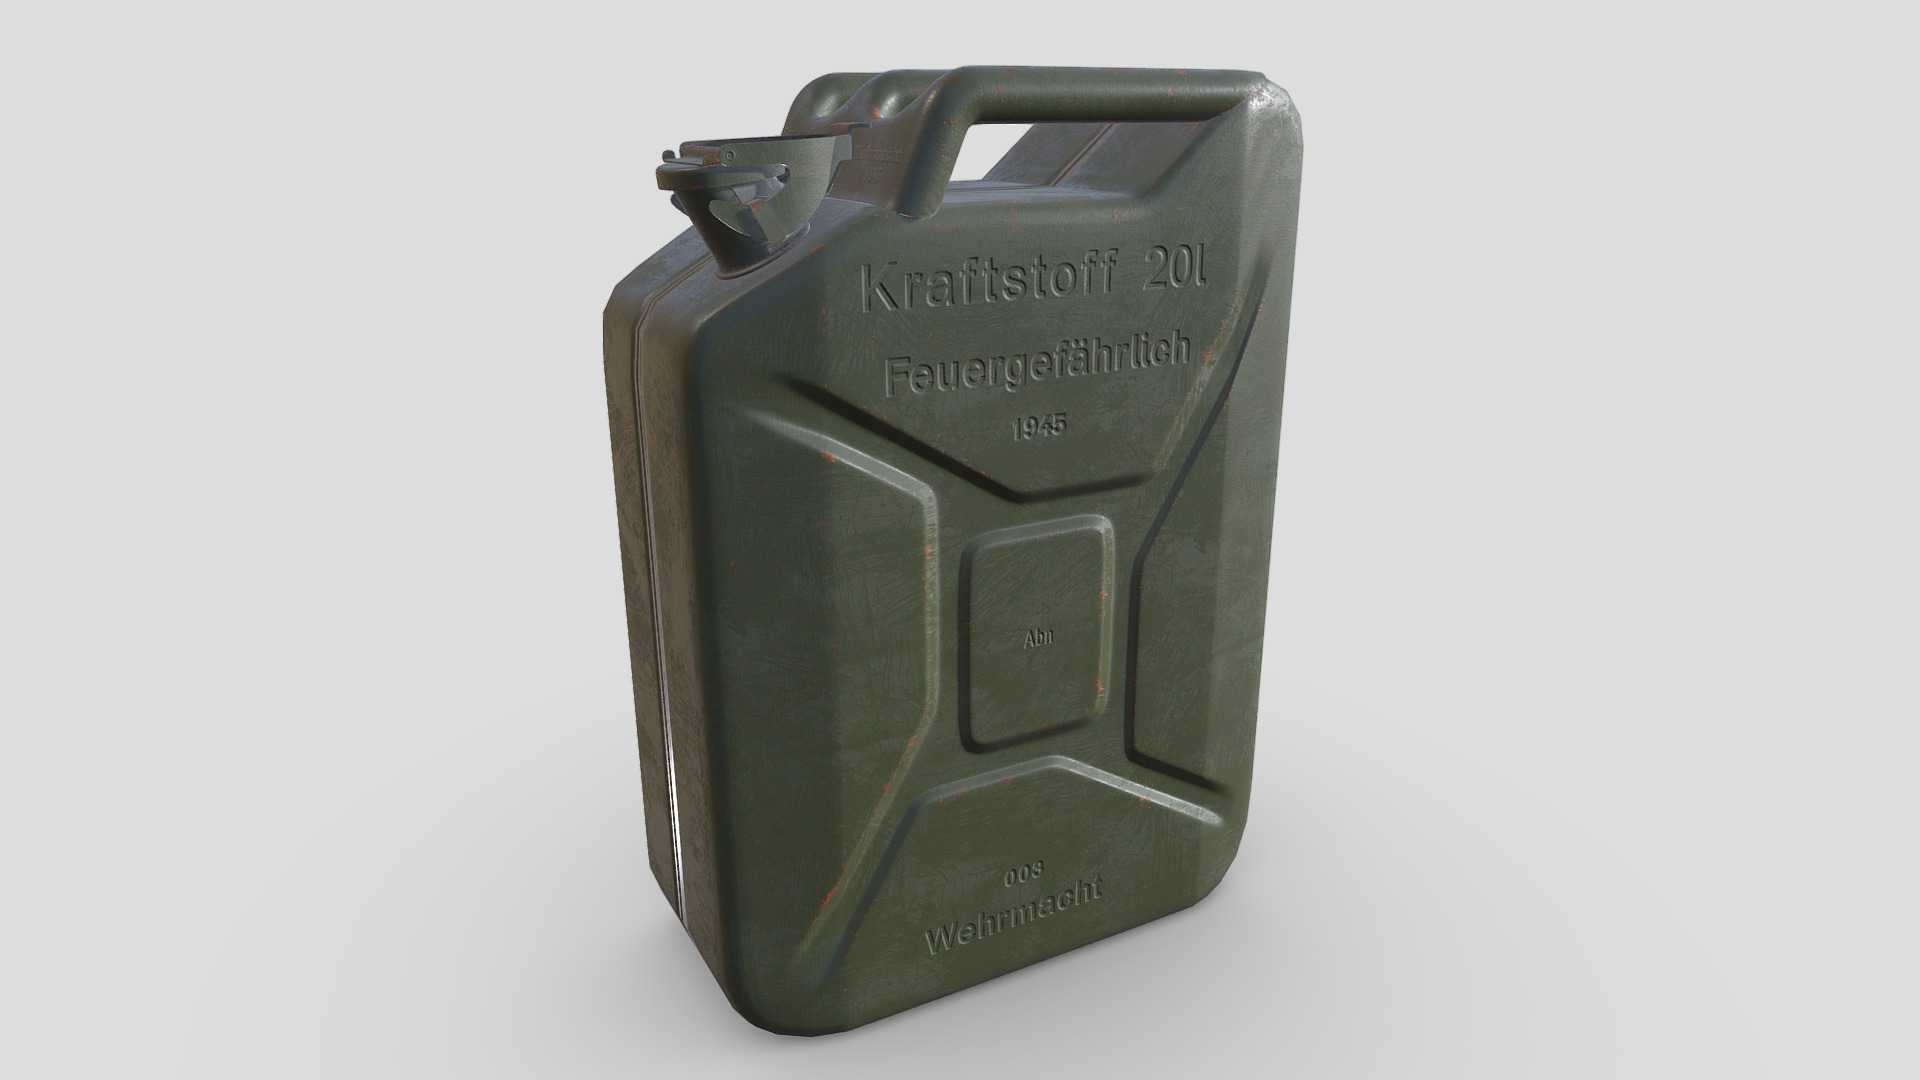 3D model Canister 20L Wehrmachtskanister. - This is a 3D model of the Canister 20L Wehrmachtskanister.. The 3D model is about a silver and black watch.